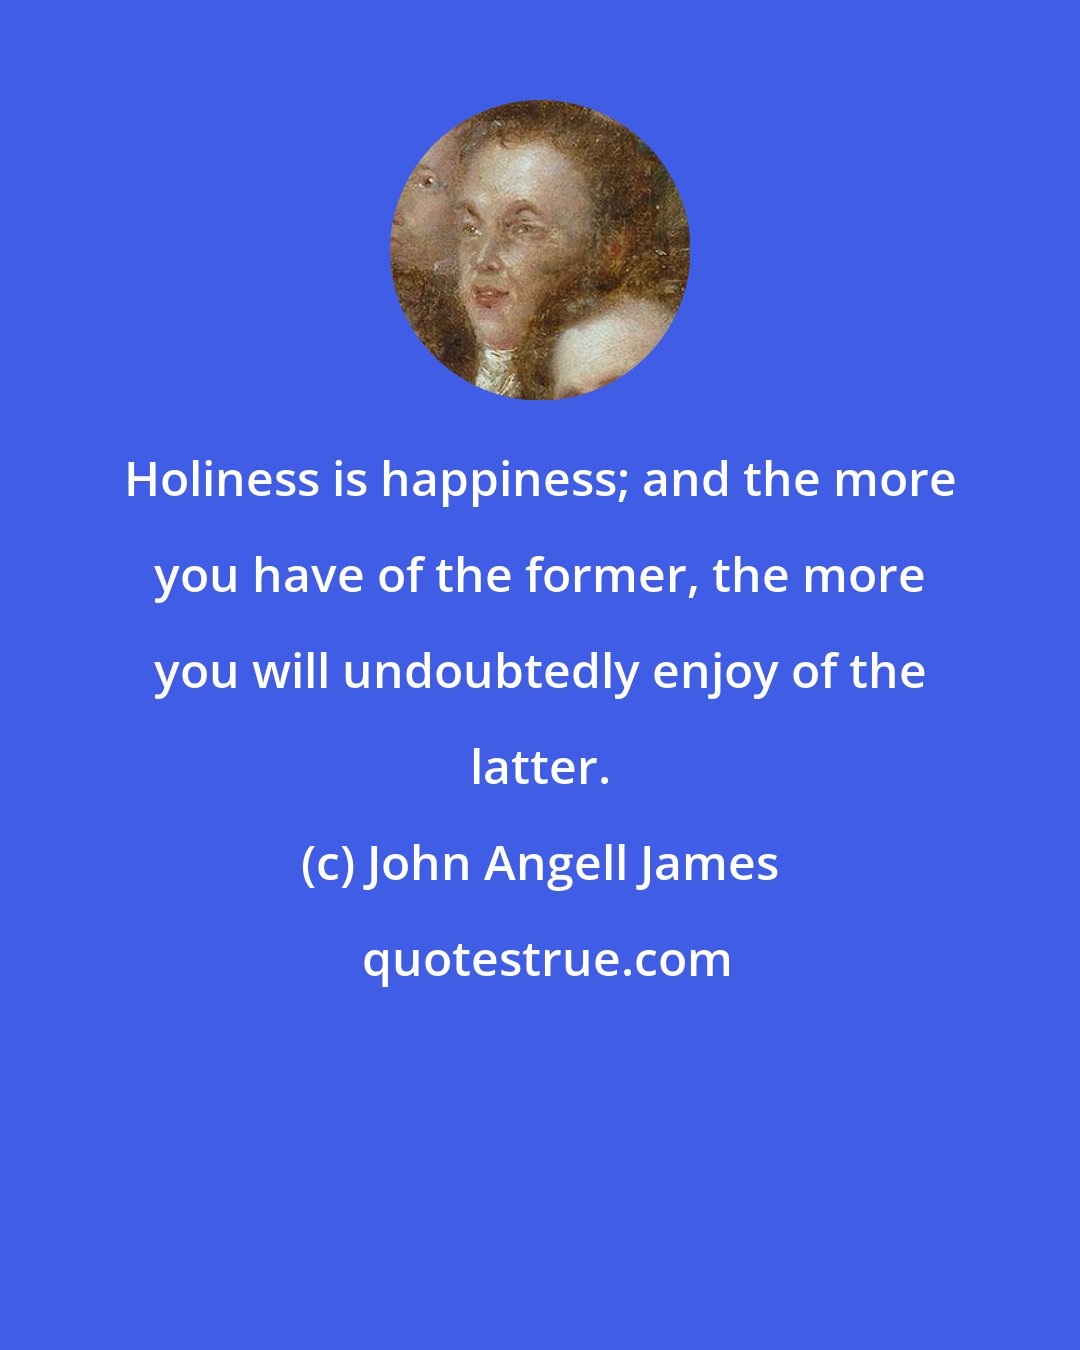 John Angell James: Holiness is happiness; and the more you have of the former, the more you will undoubtedly enjoy of the latter.